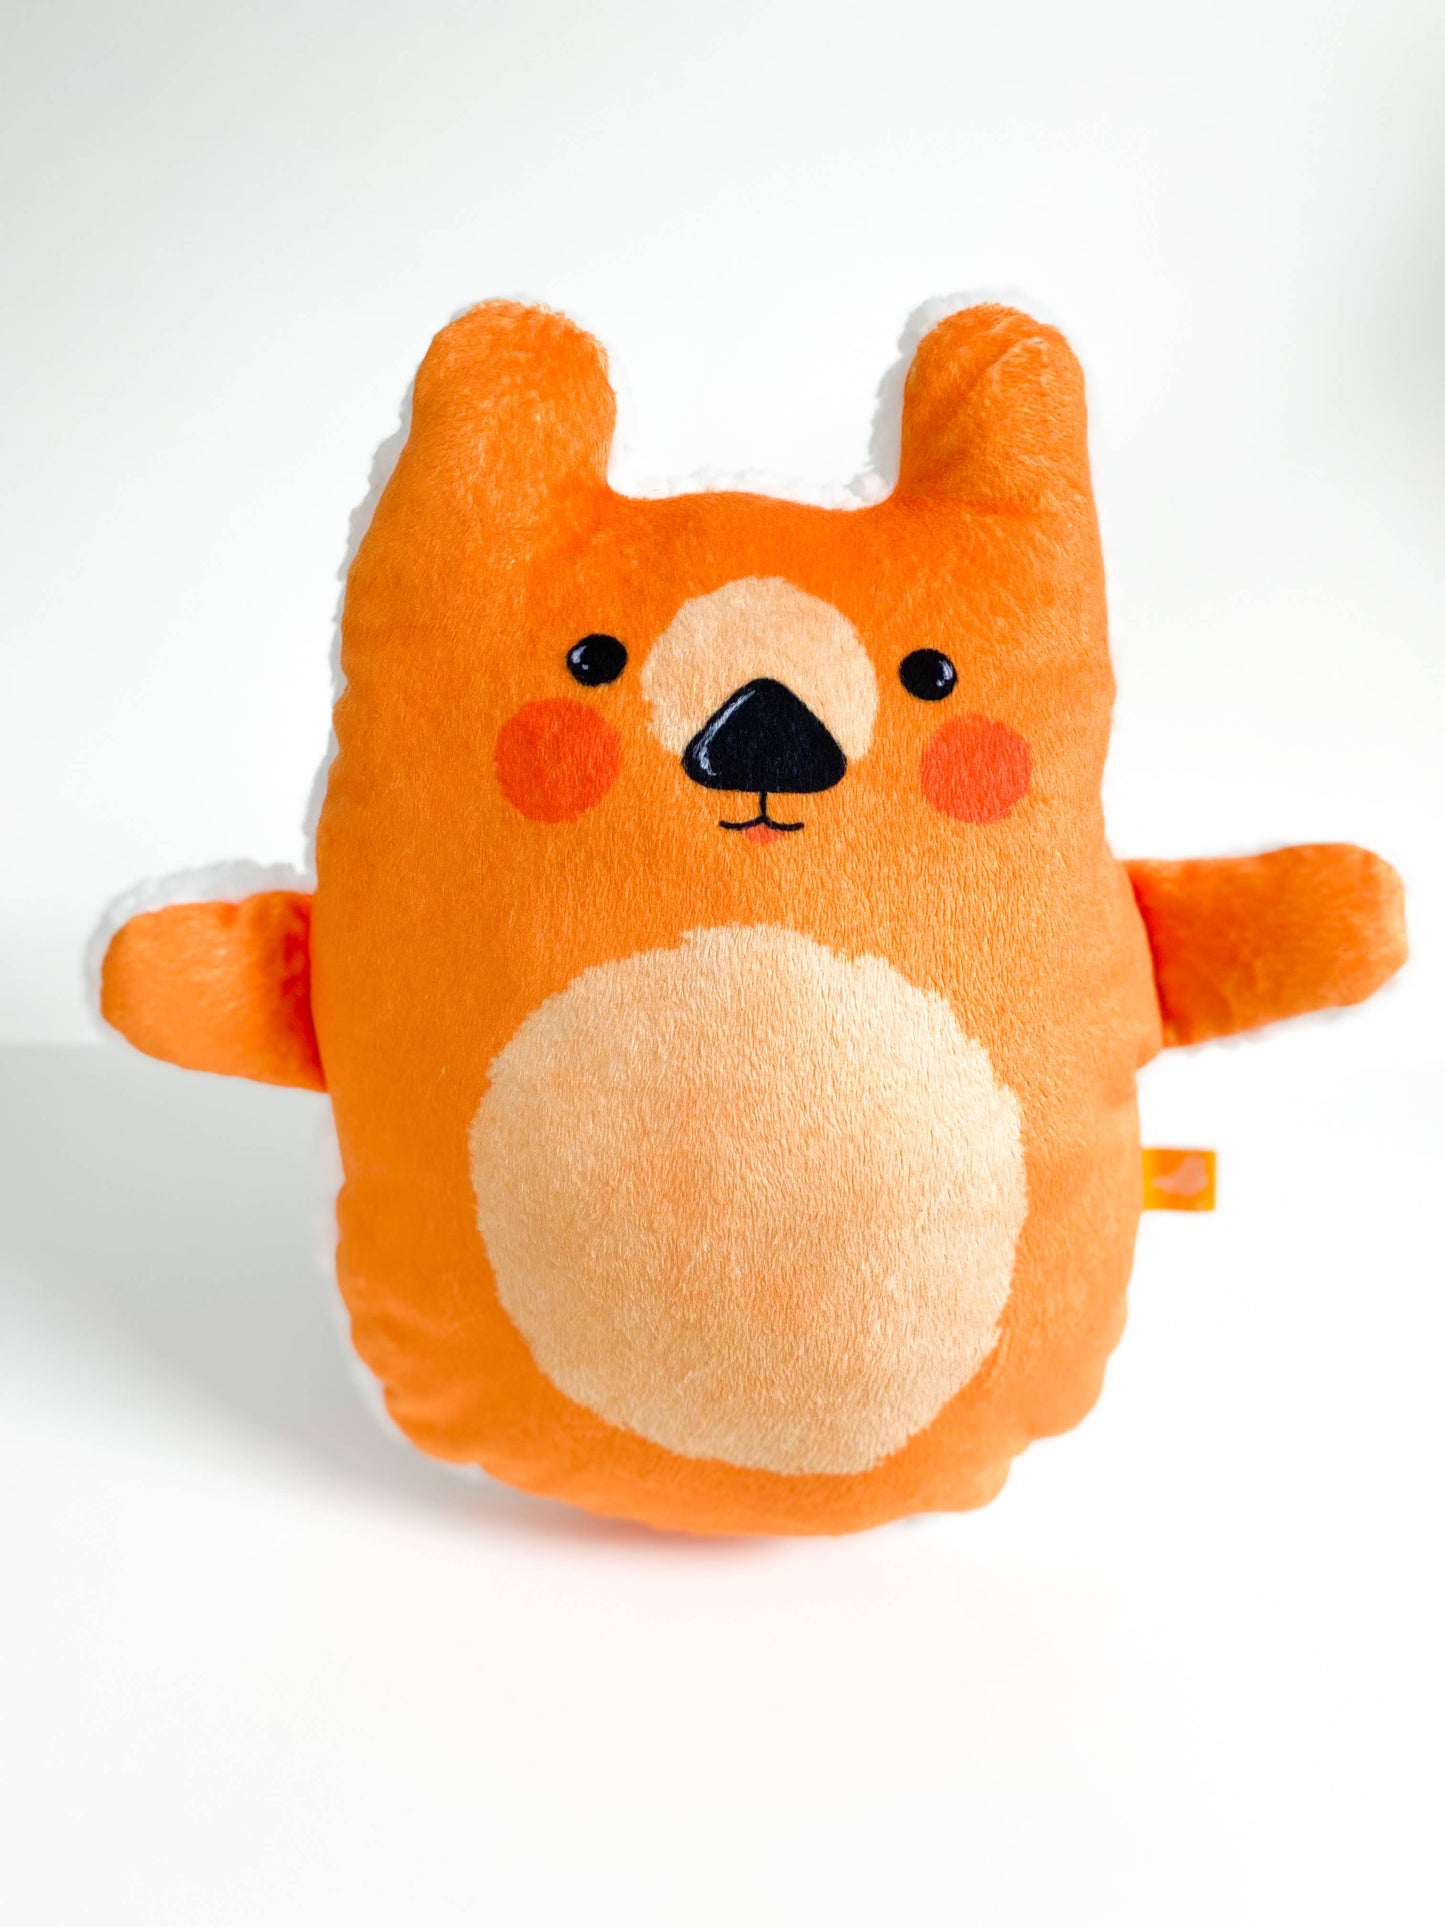 Punkling - "Clementine" - stuffed animal (with pocket!)